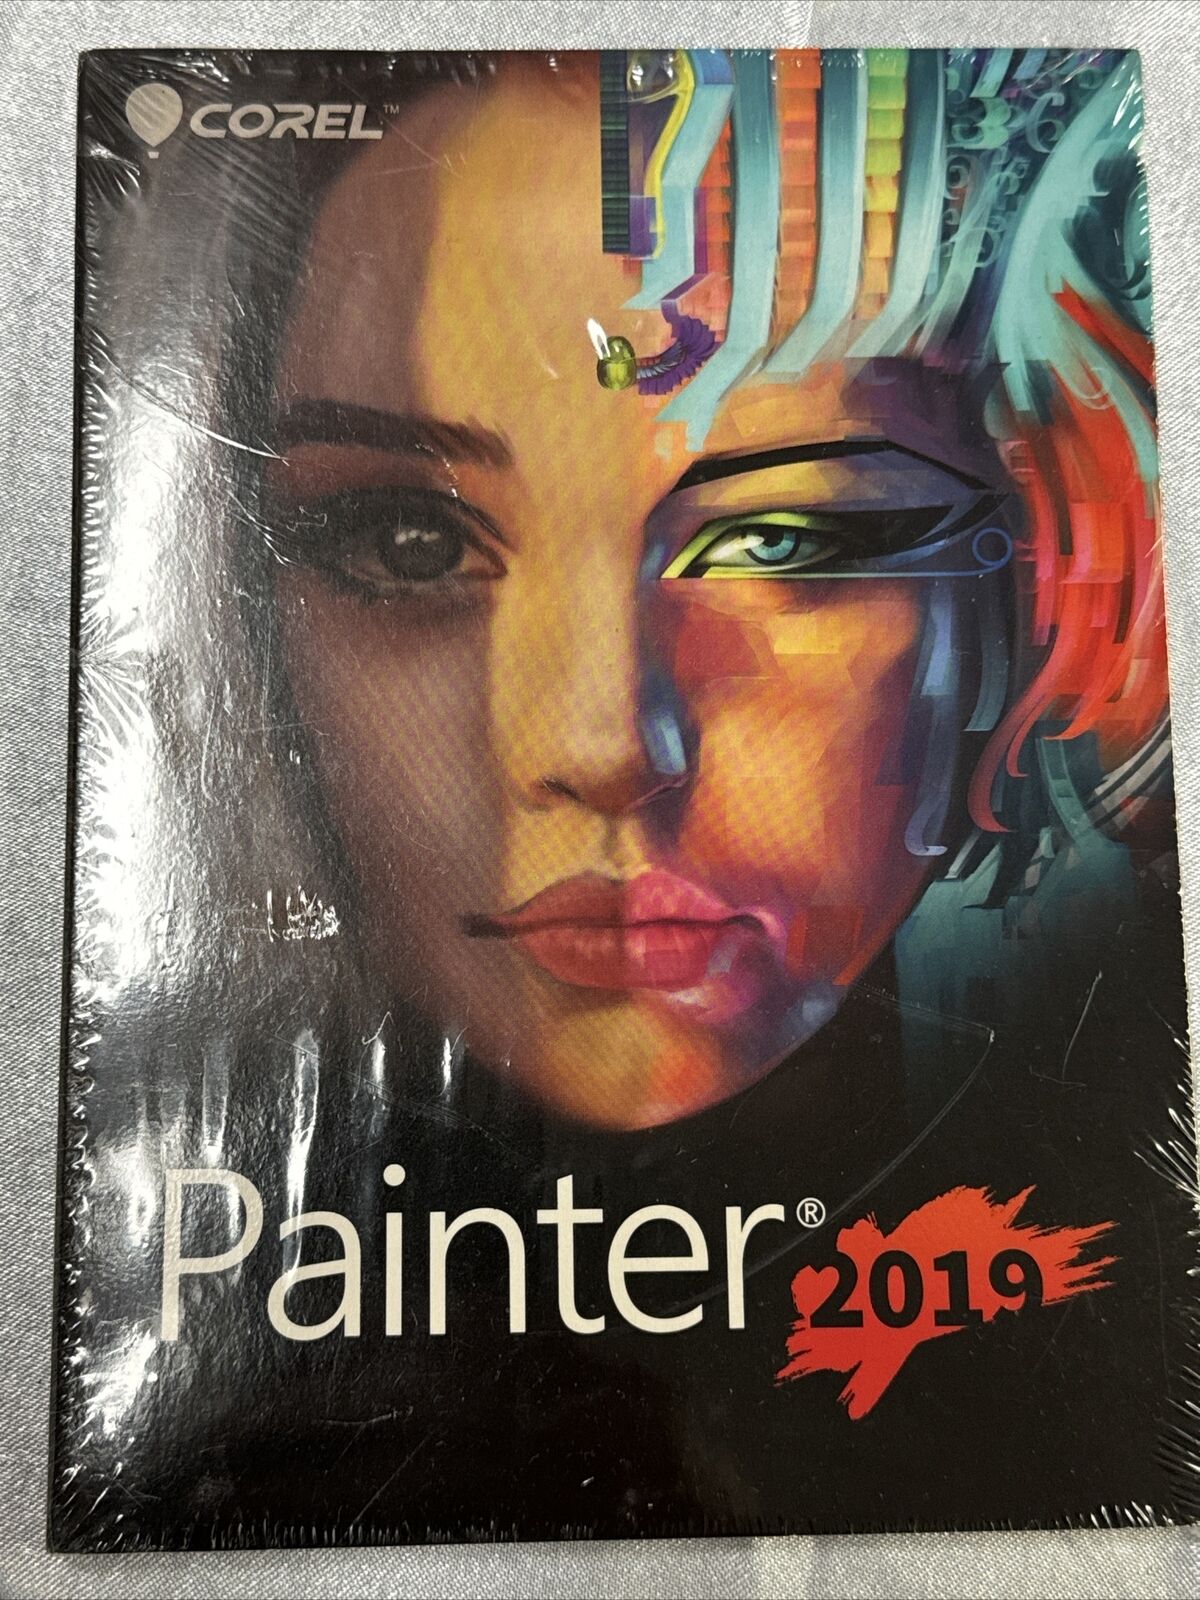 Corel Painter 2019 Full Version New Retail Box for EU Residents Only No US